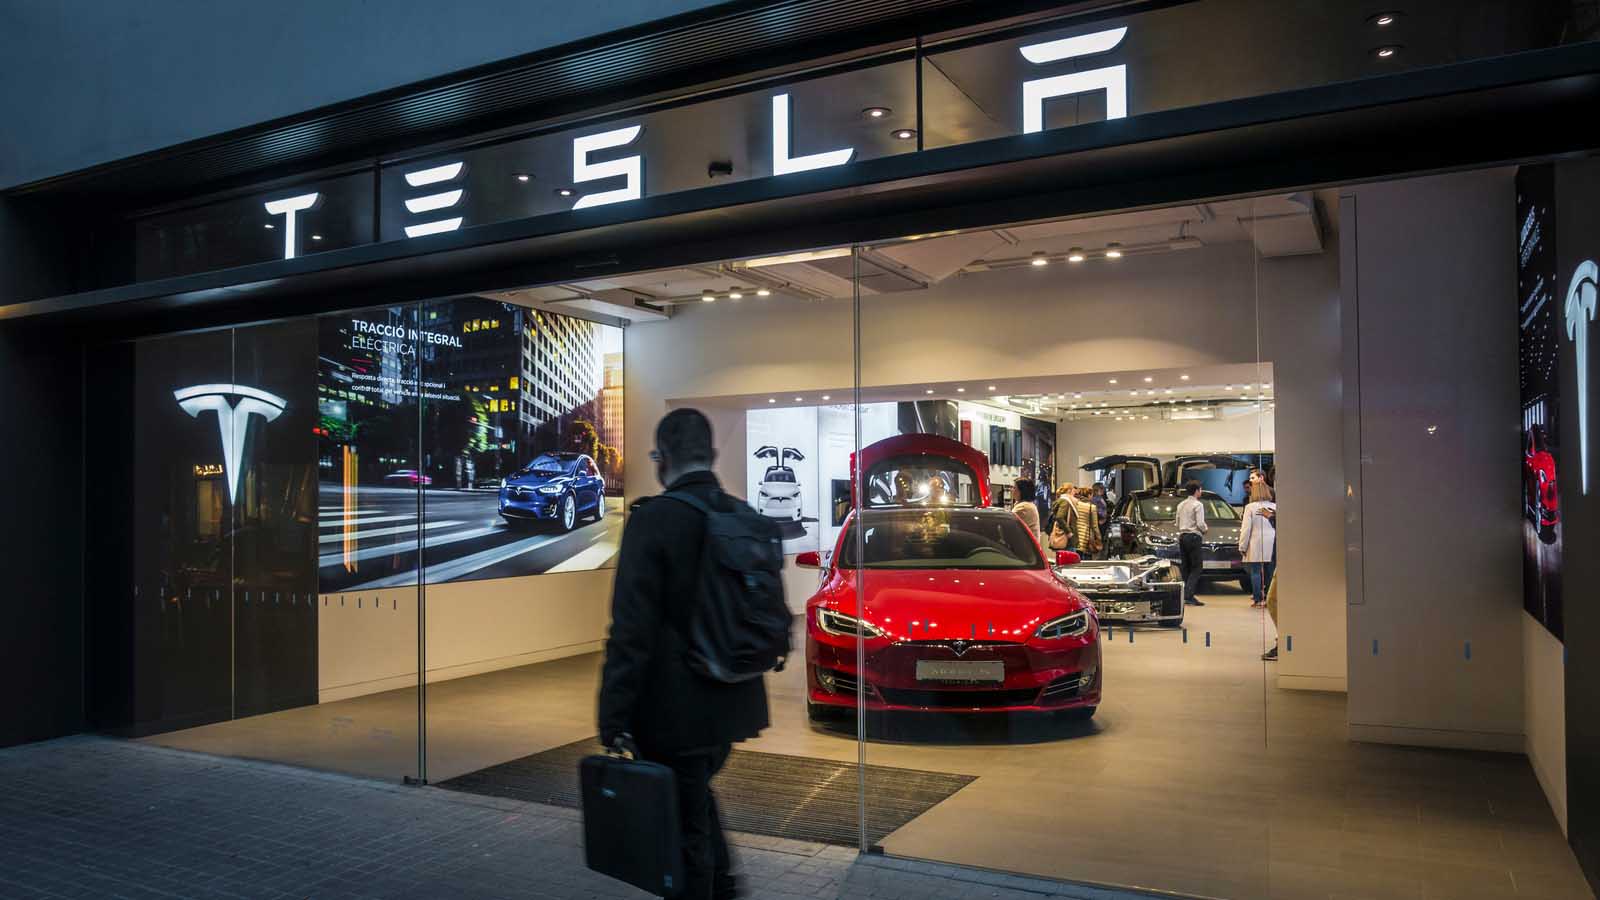 A person walks past a Tesla (TSLA) store window with multiple vehicles visible behind a glass door